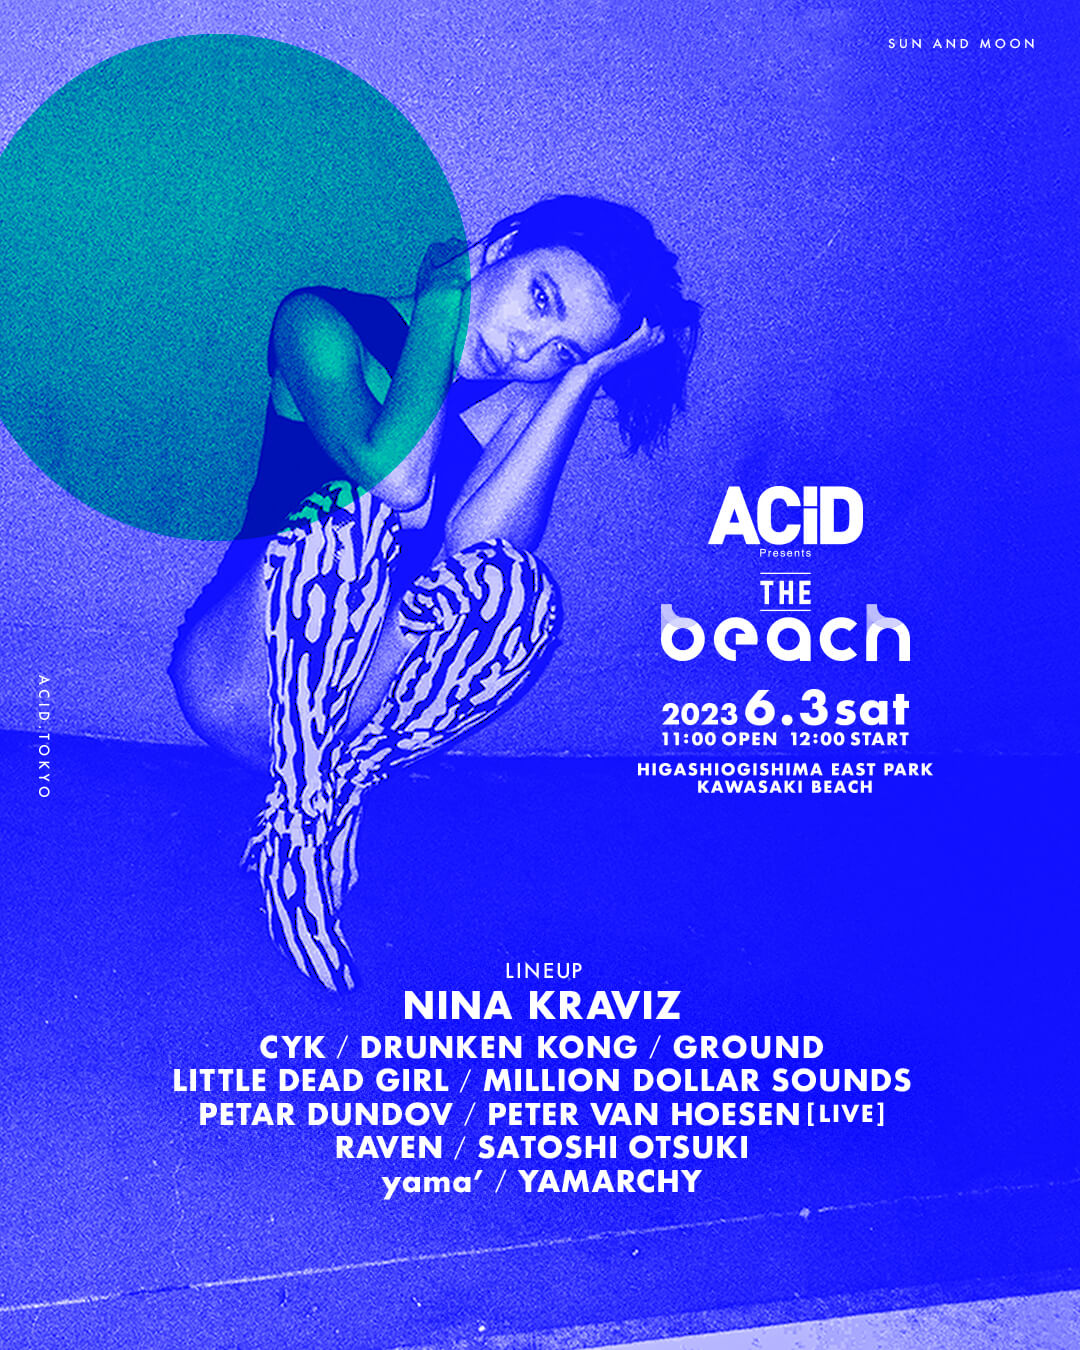 ACiD presents THE BEACH powered by INSTYLE GROUPz